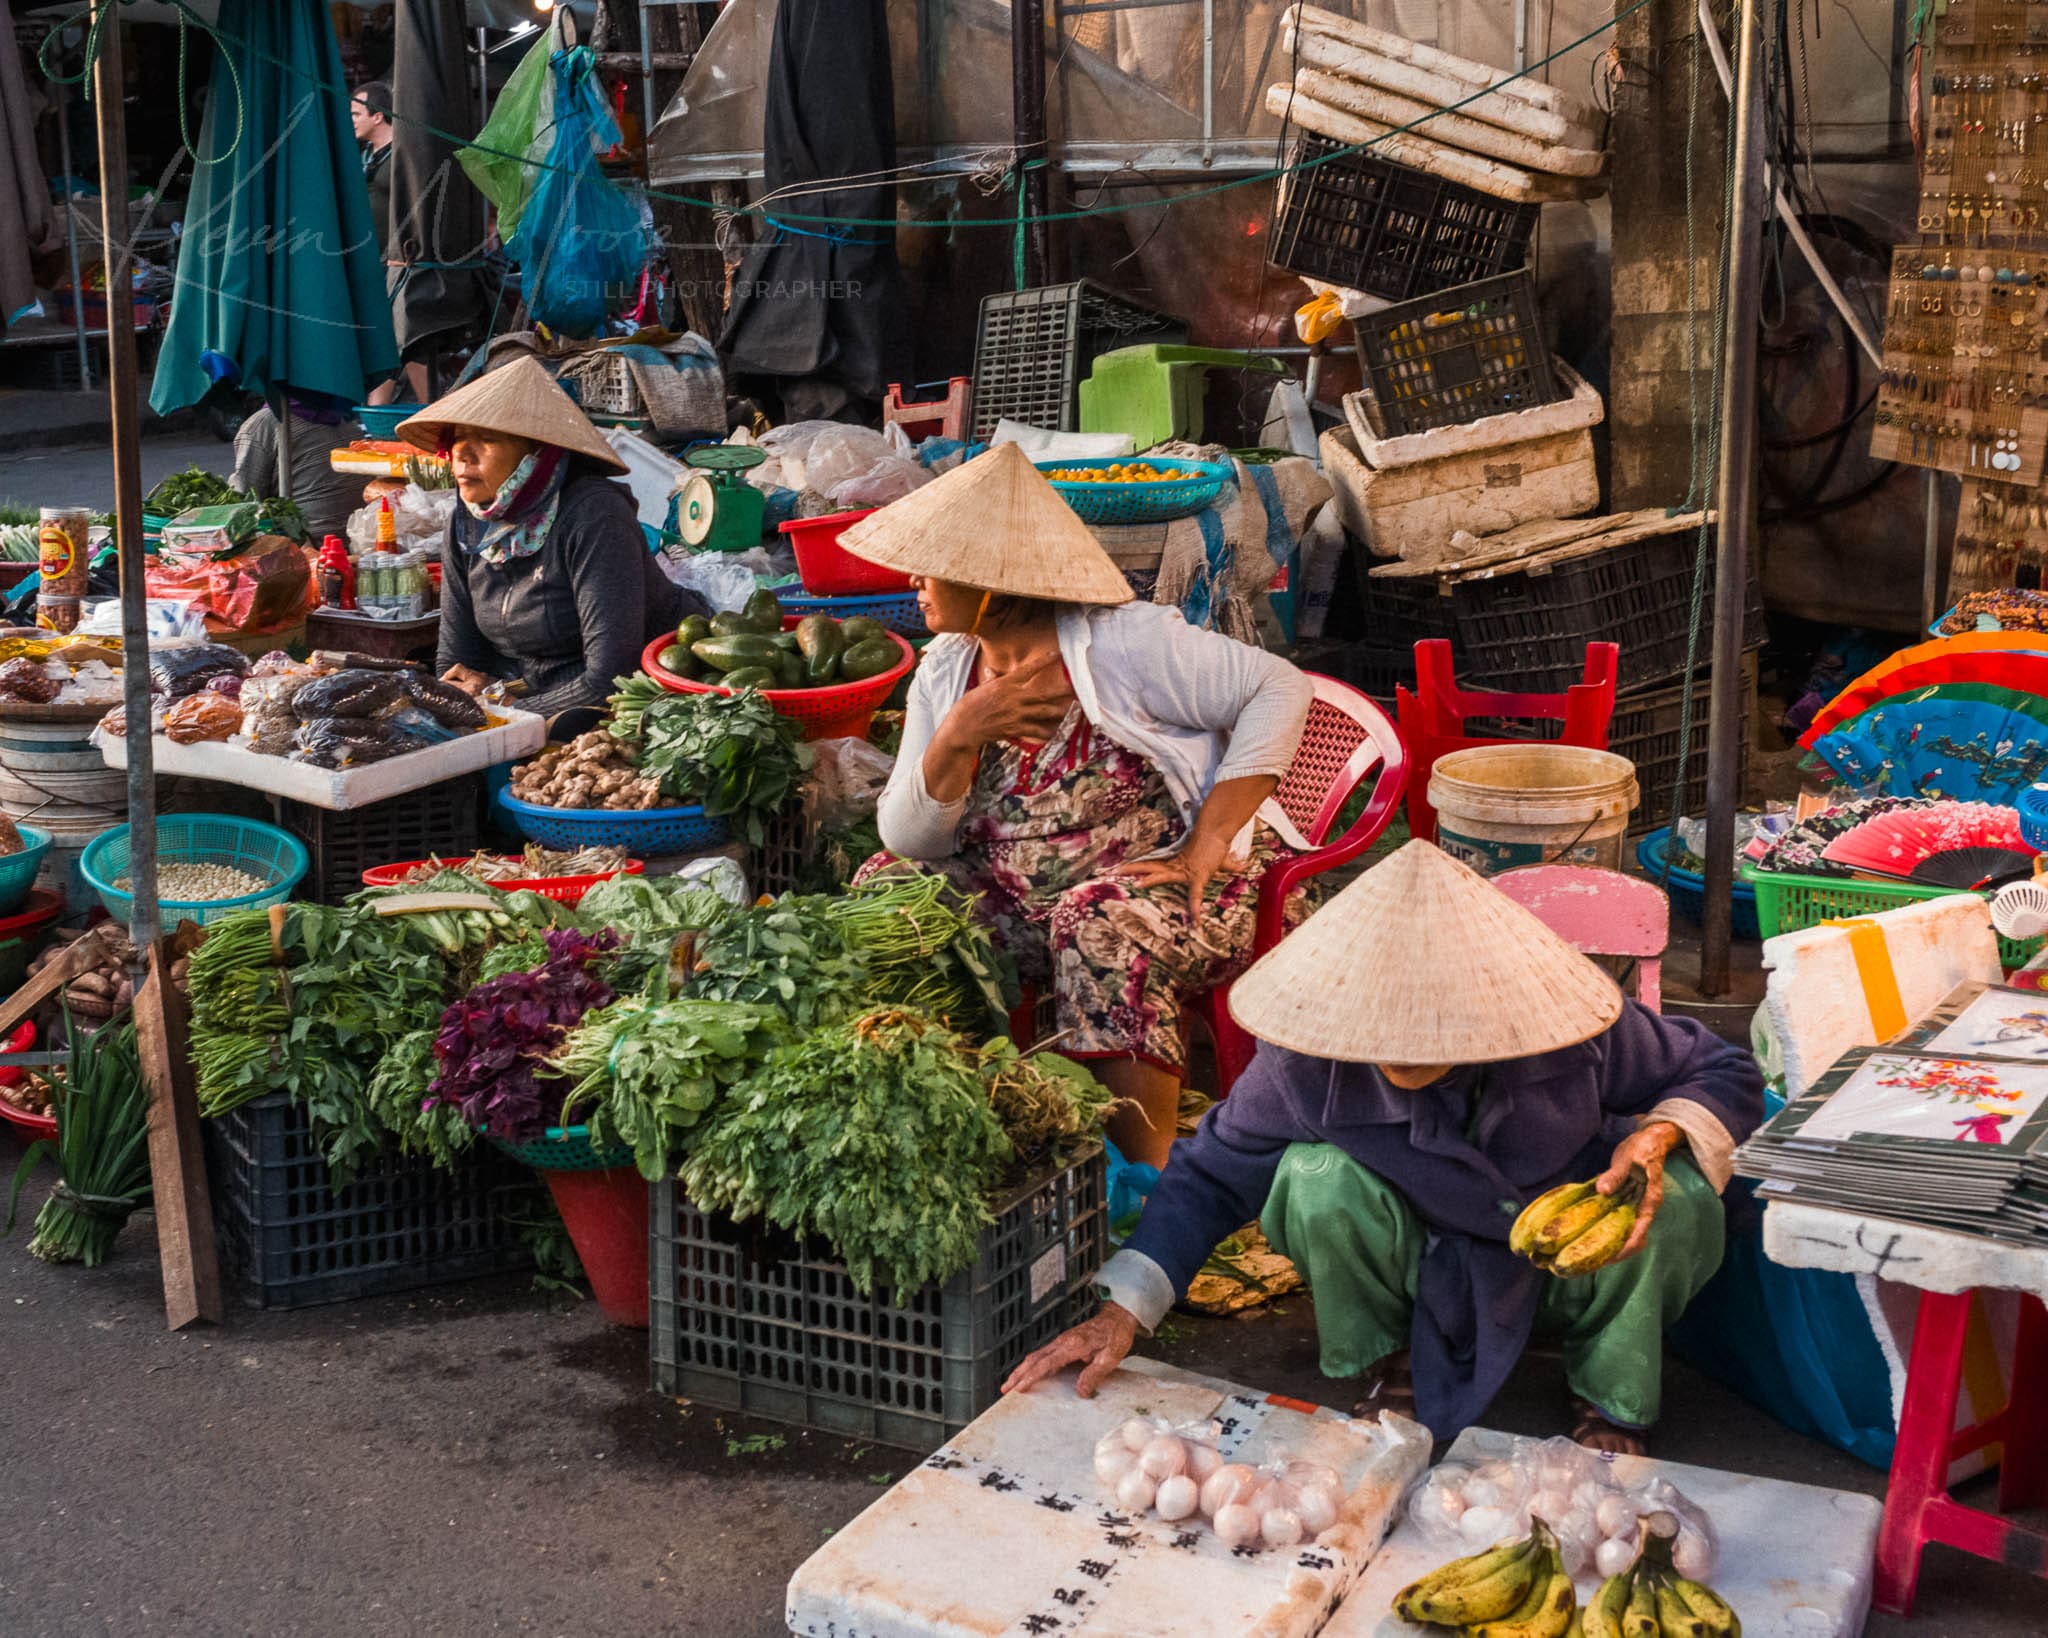 Bustling Vietnam street market with vendors selling fresh produce and local goods.